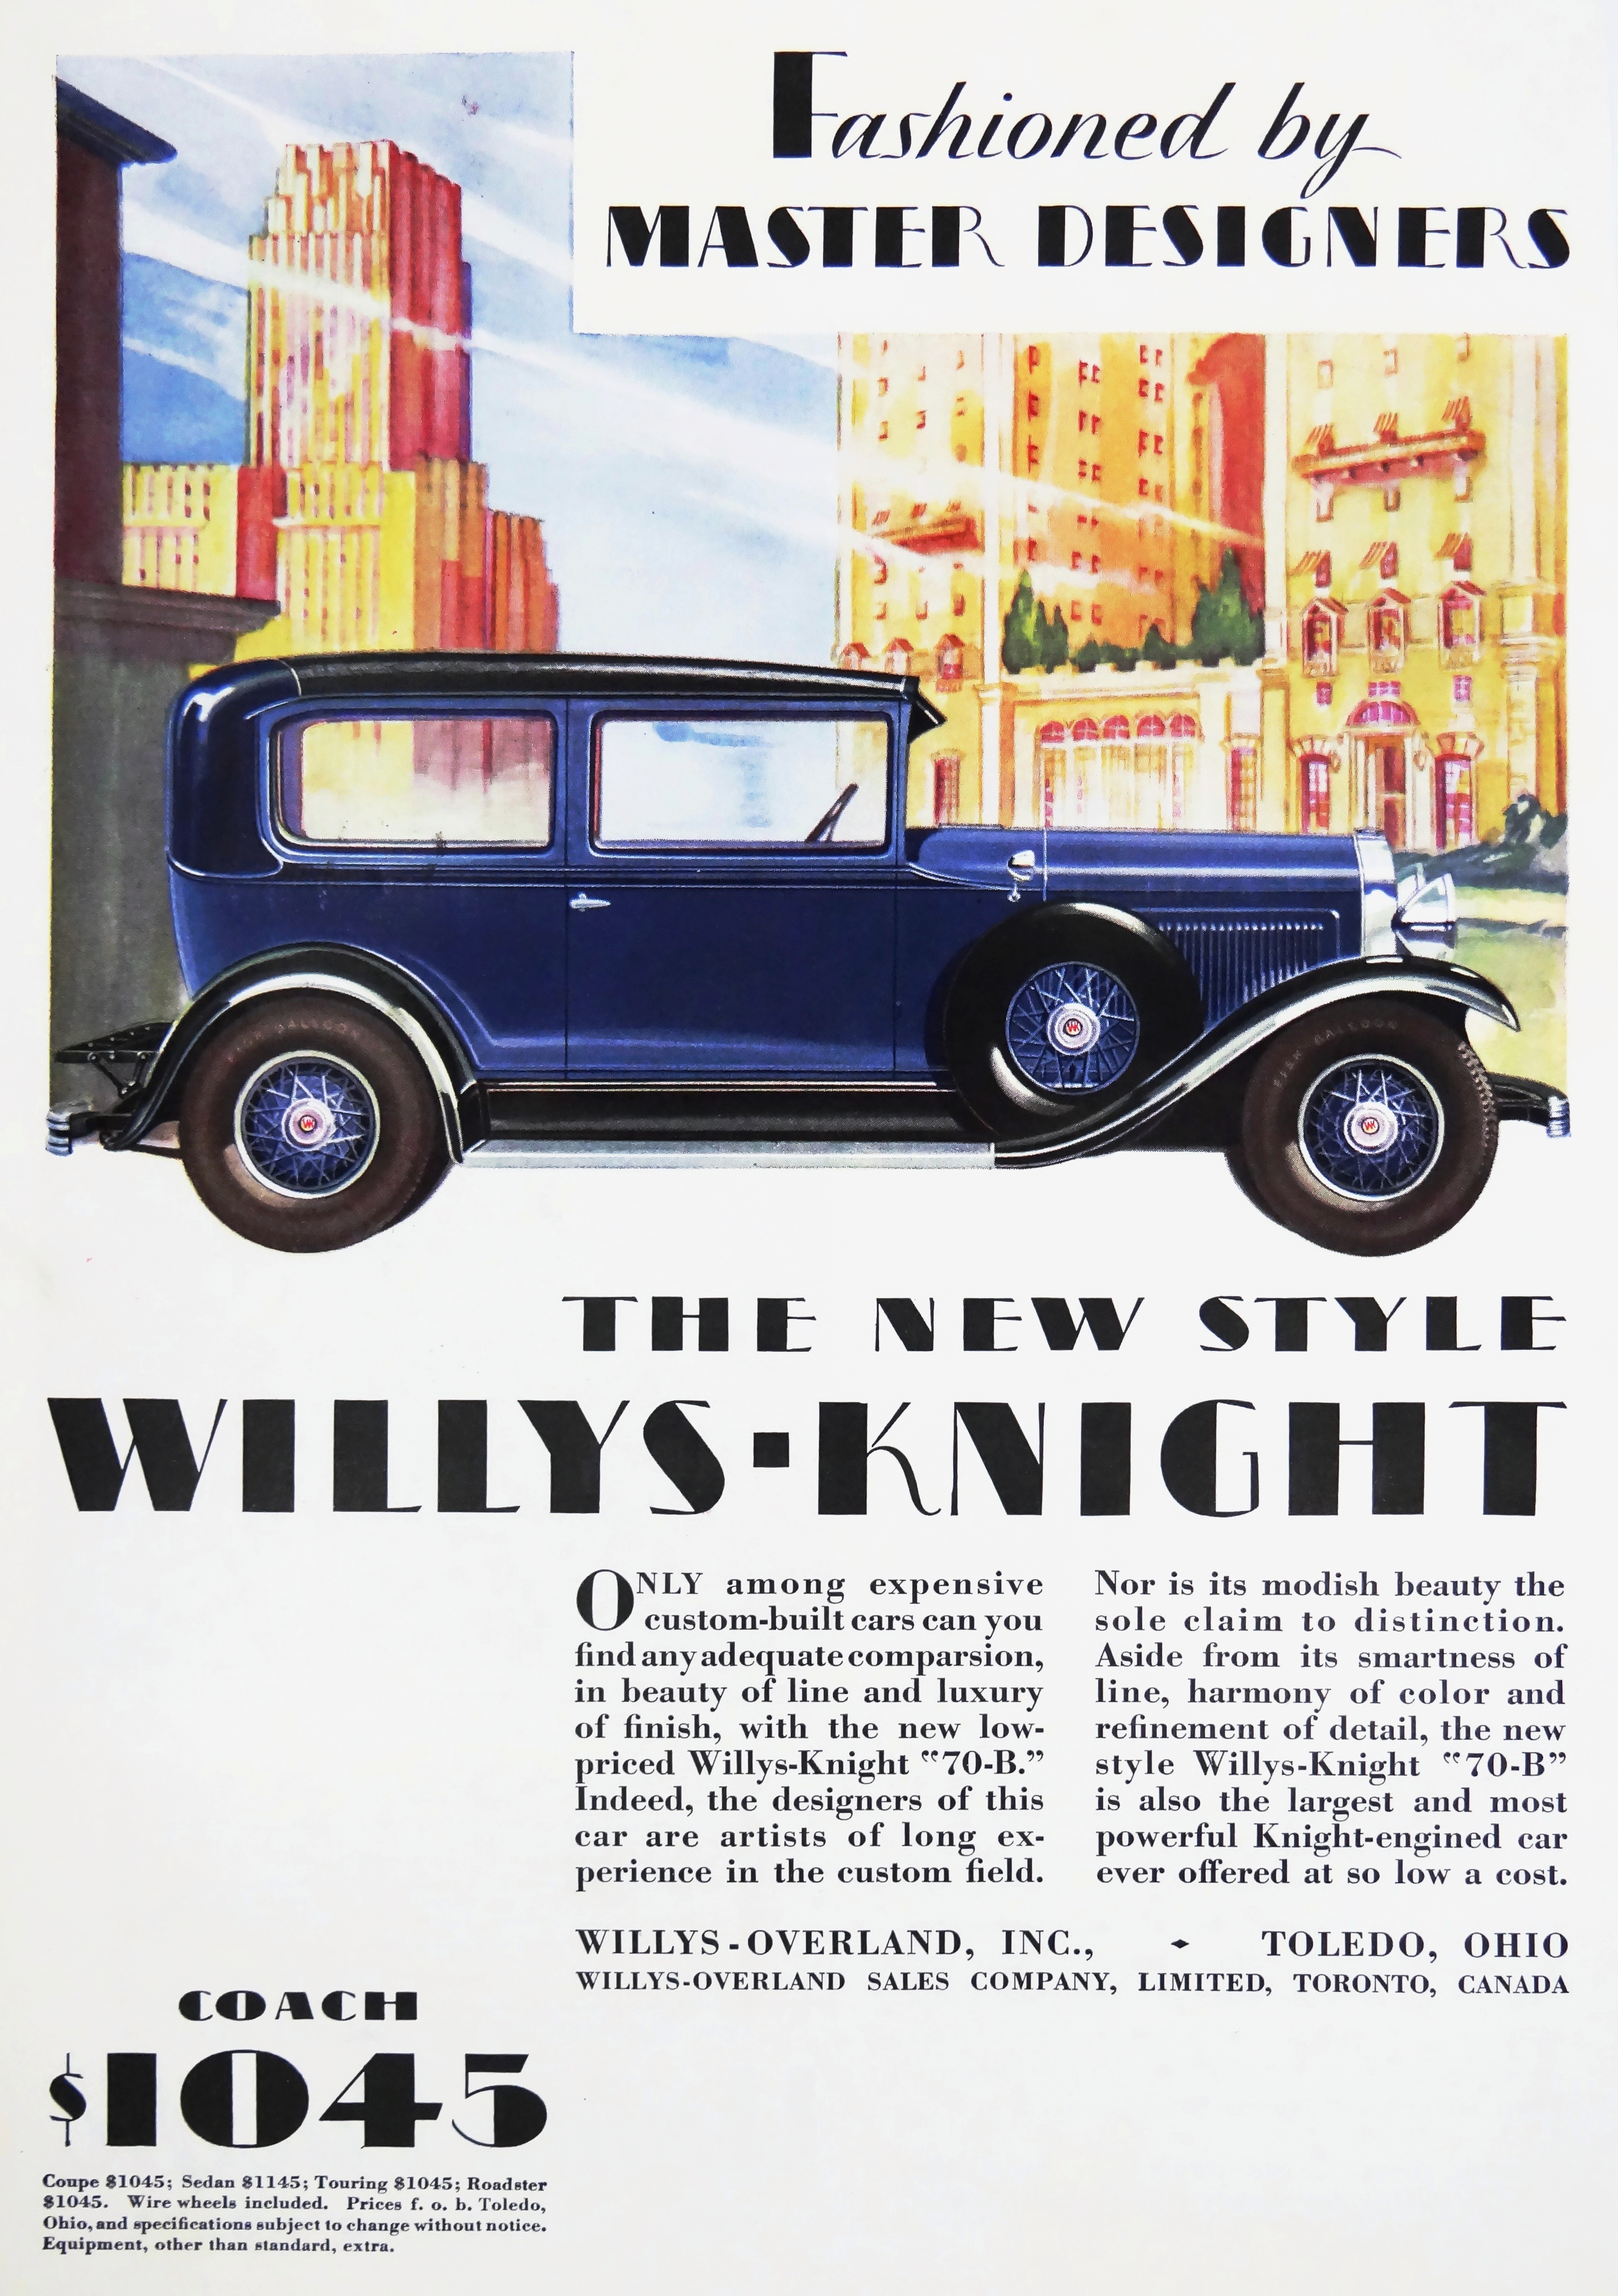 1929 Willys-Knight 70-B - published in May 1929